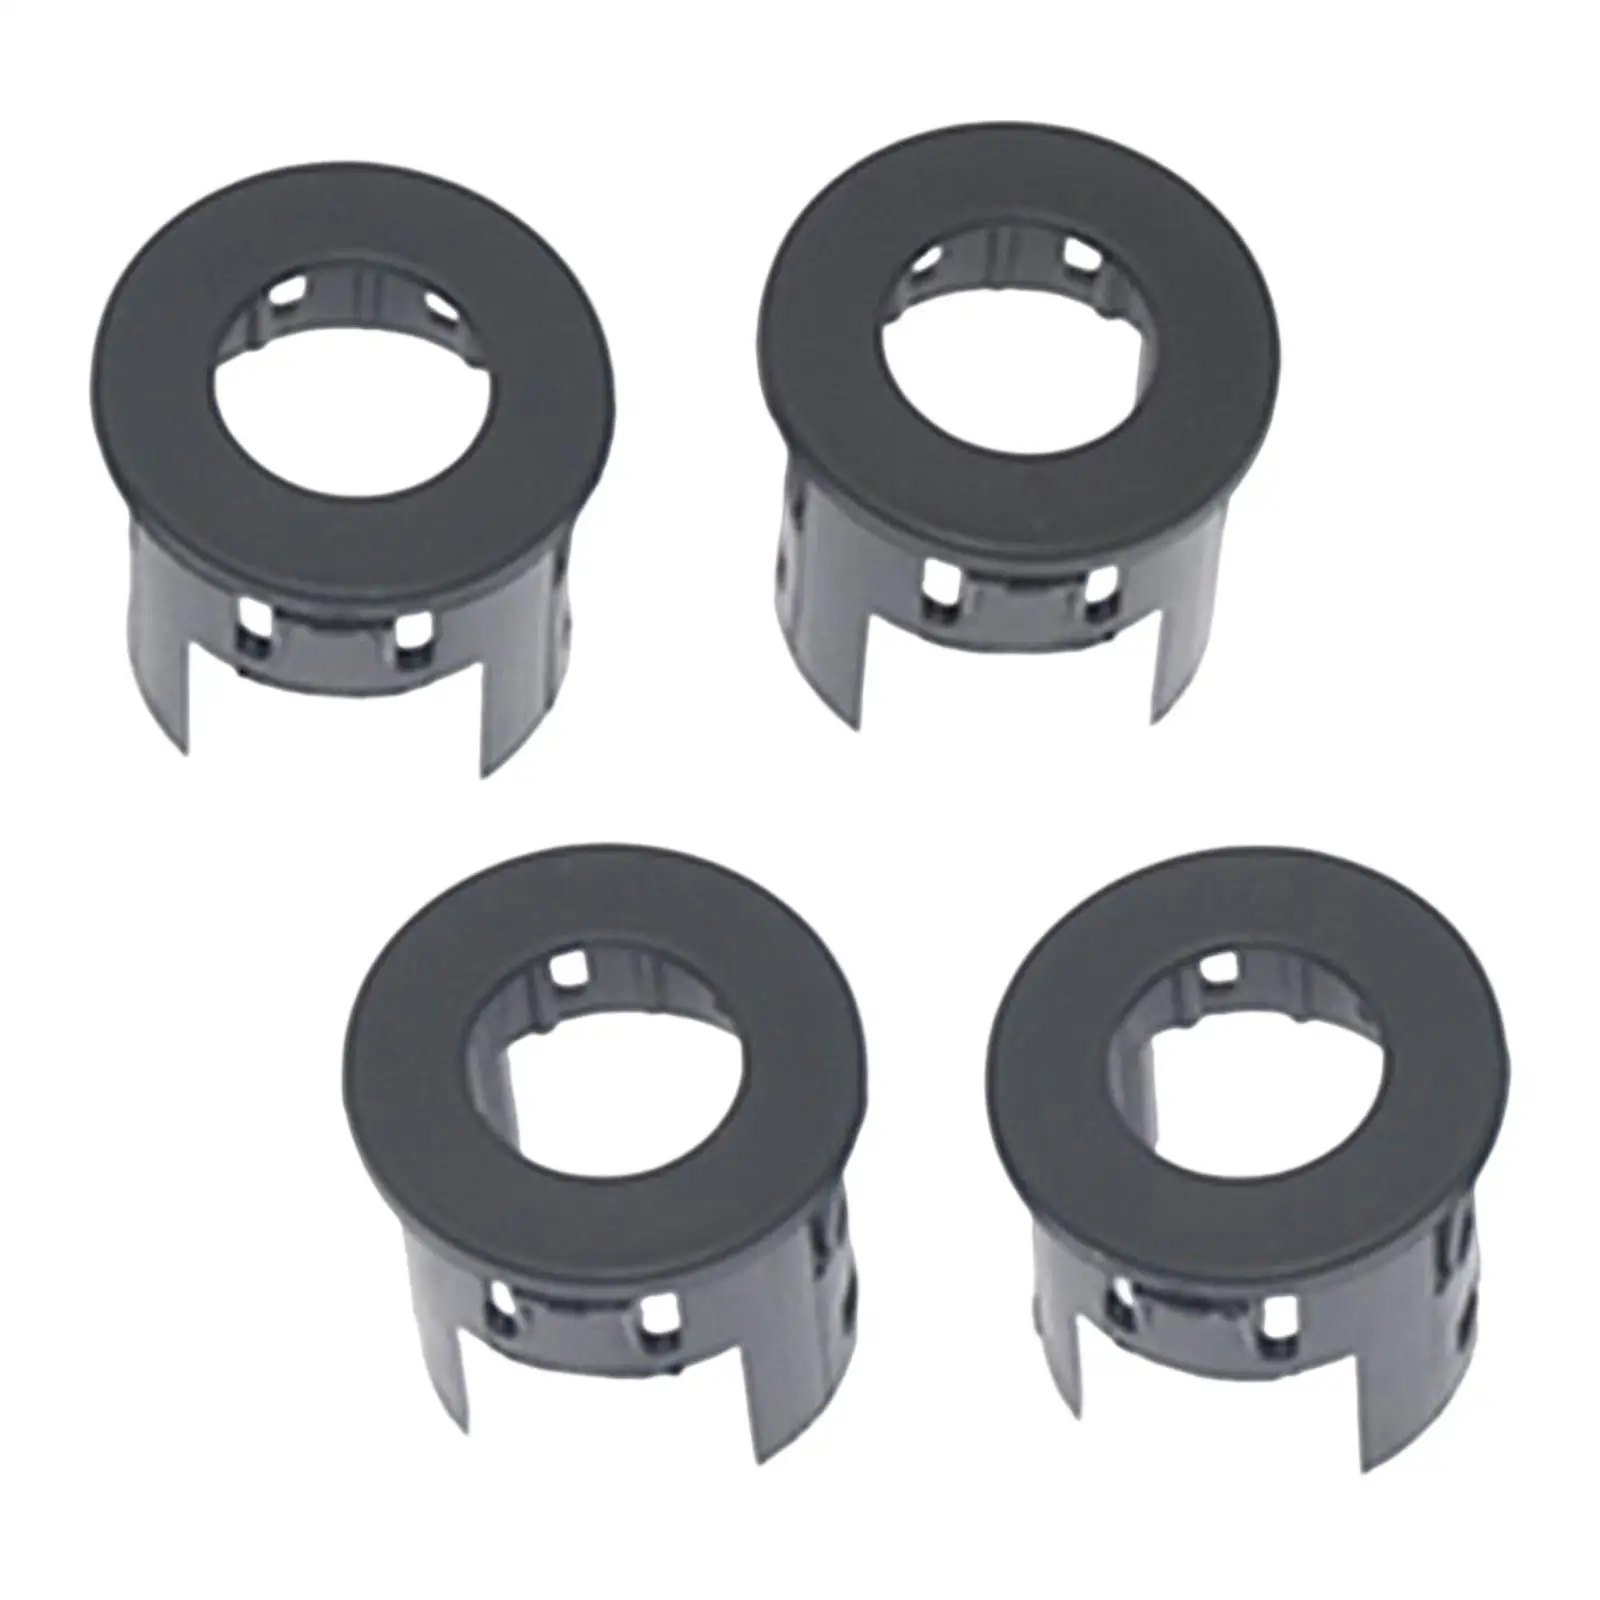 4Pcs Automotive Parking Assist Bezels, 5LS52Tzzaa Front Rear for RAM 1500 Accessory Easy Installation.